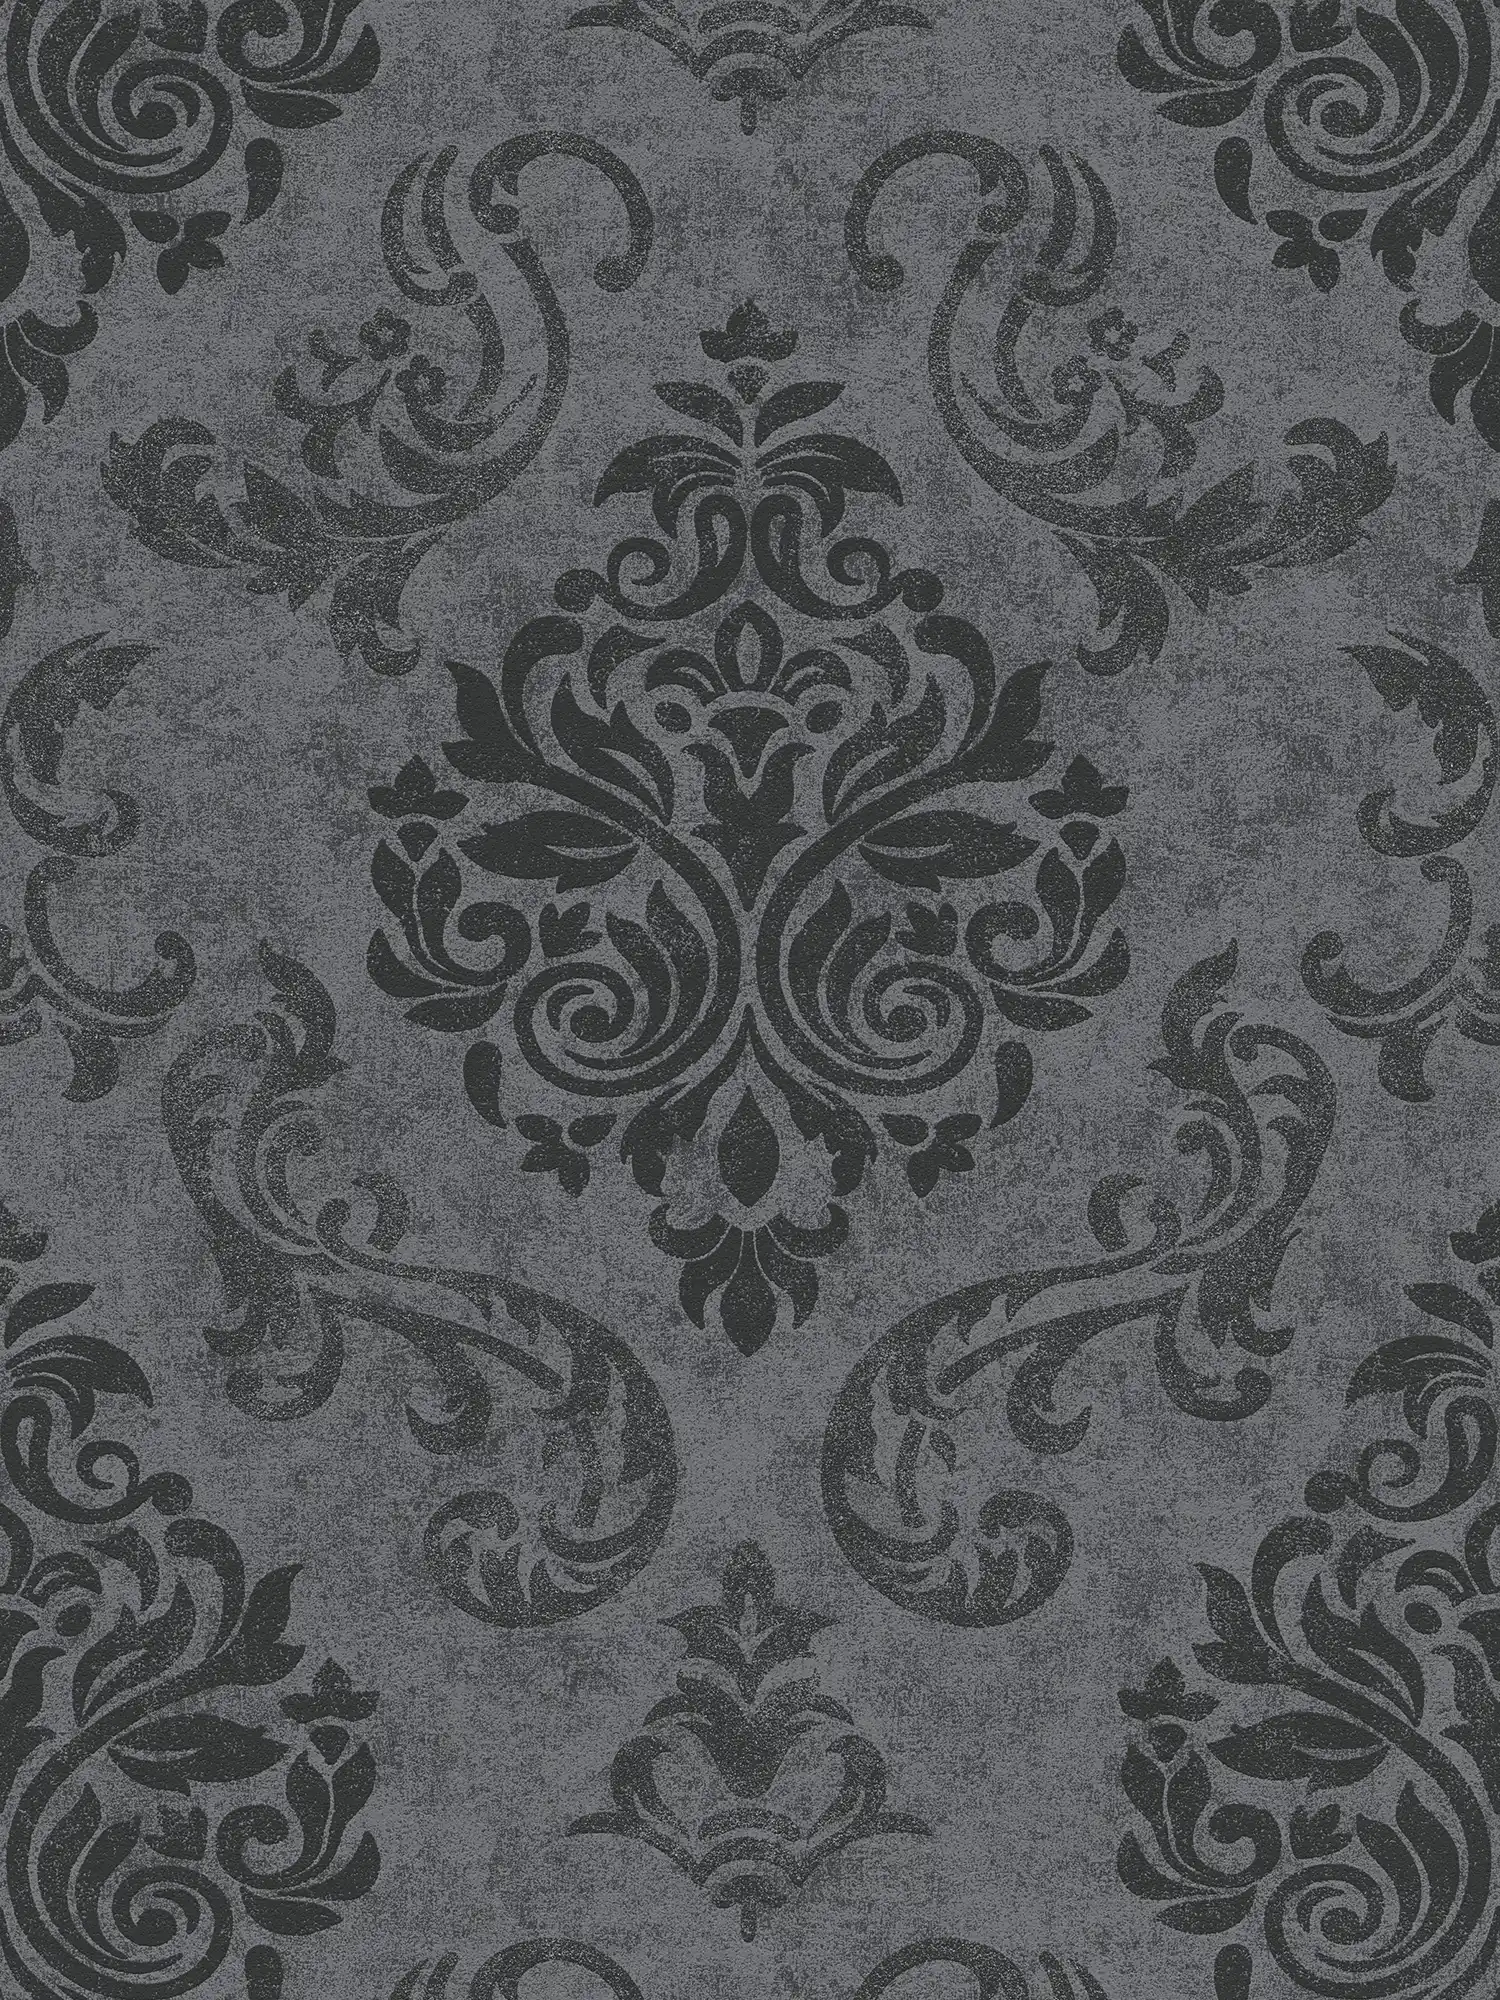 Ornaments wallpaper baroque style with glitter effect - grey, metallic, black
